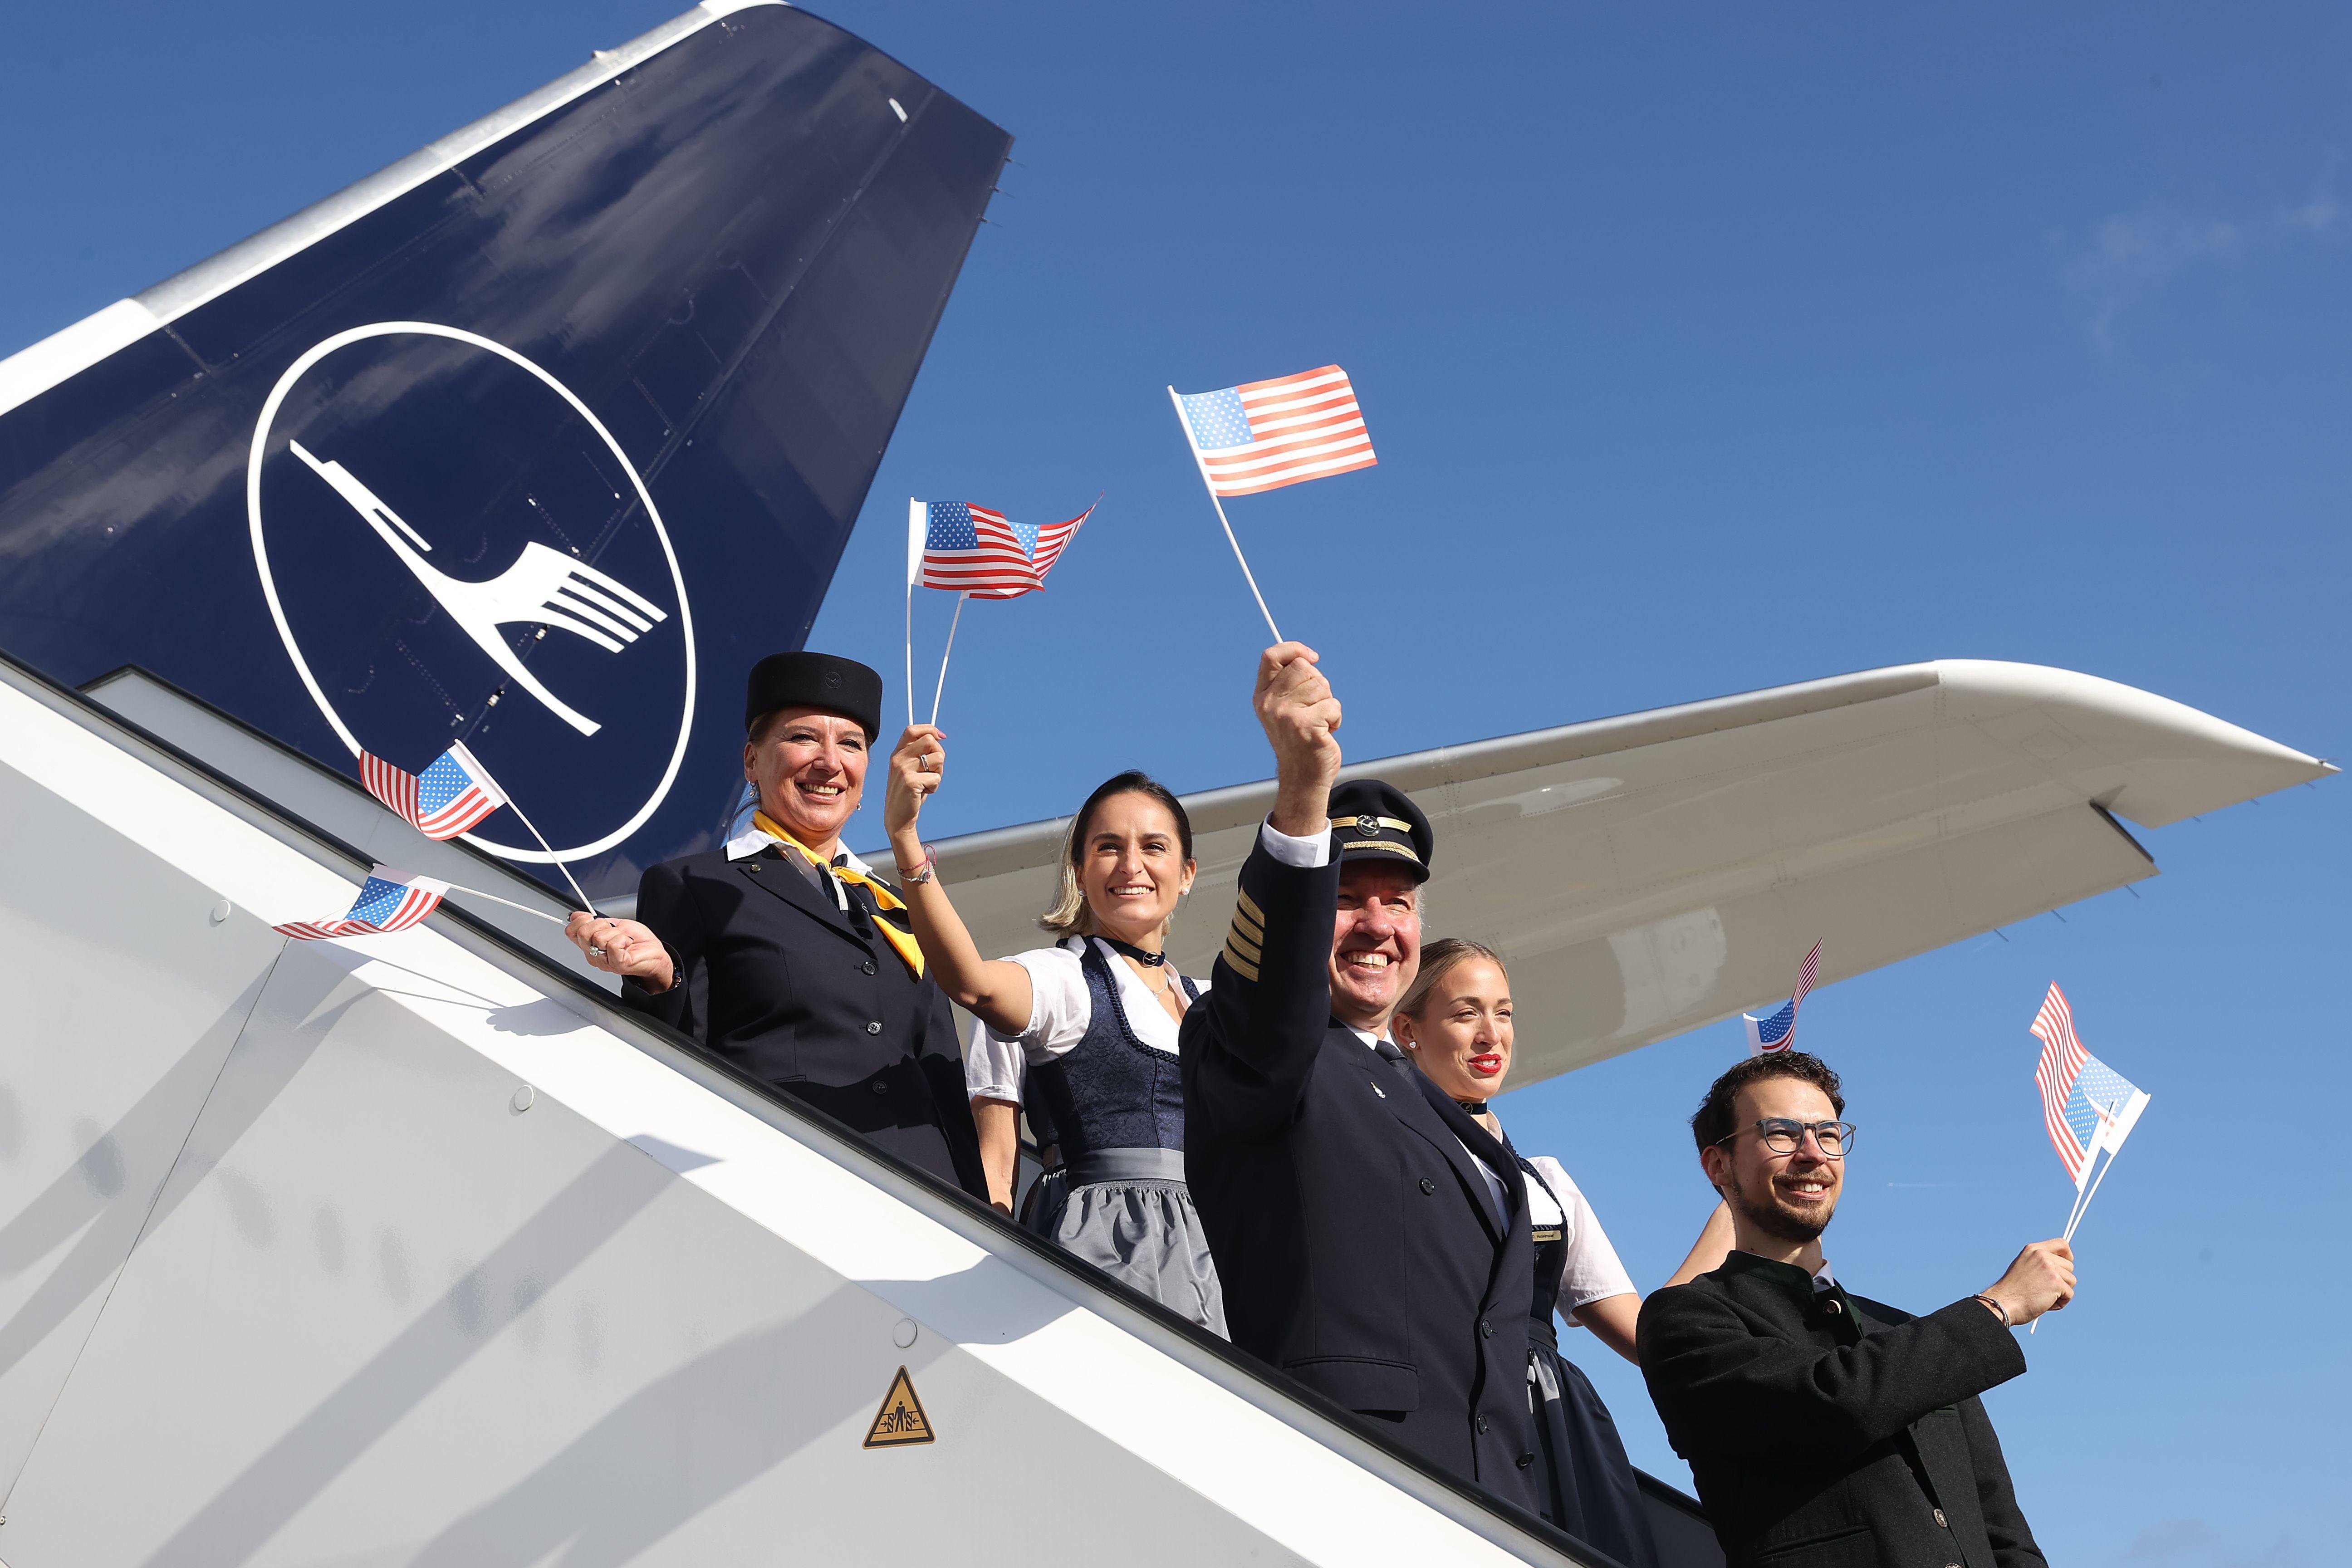 People waving flags while boarding a plane